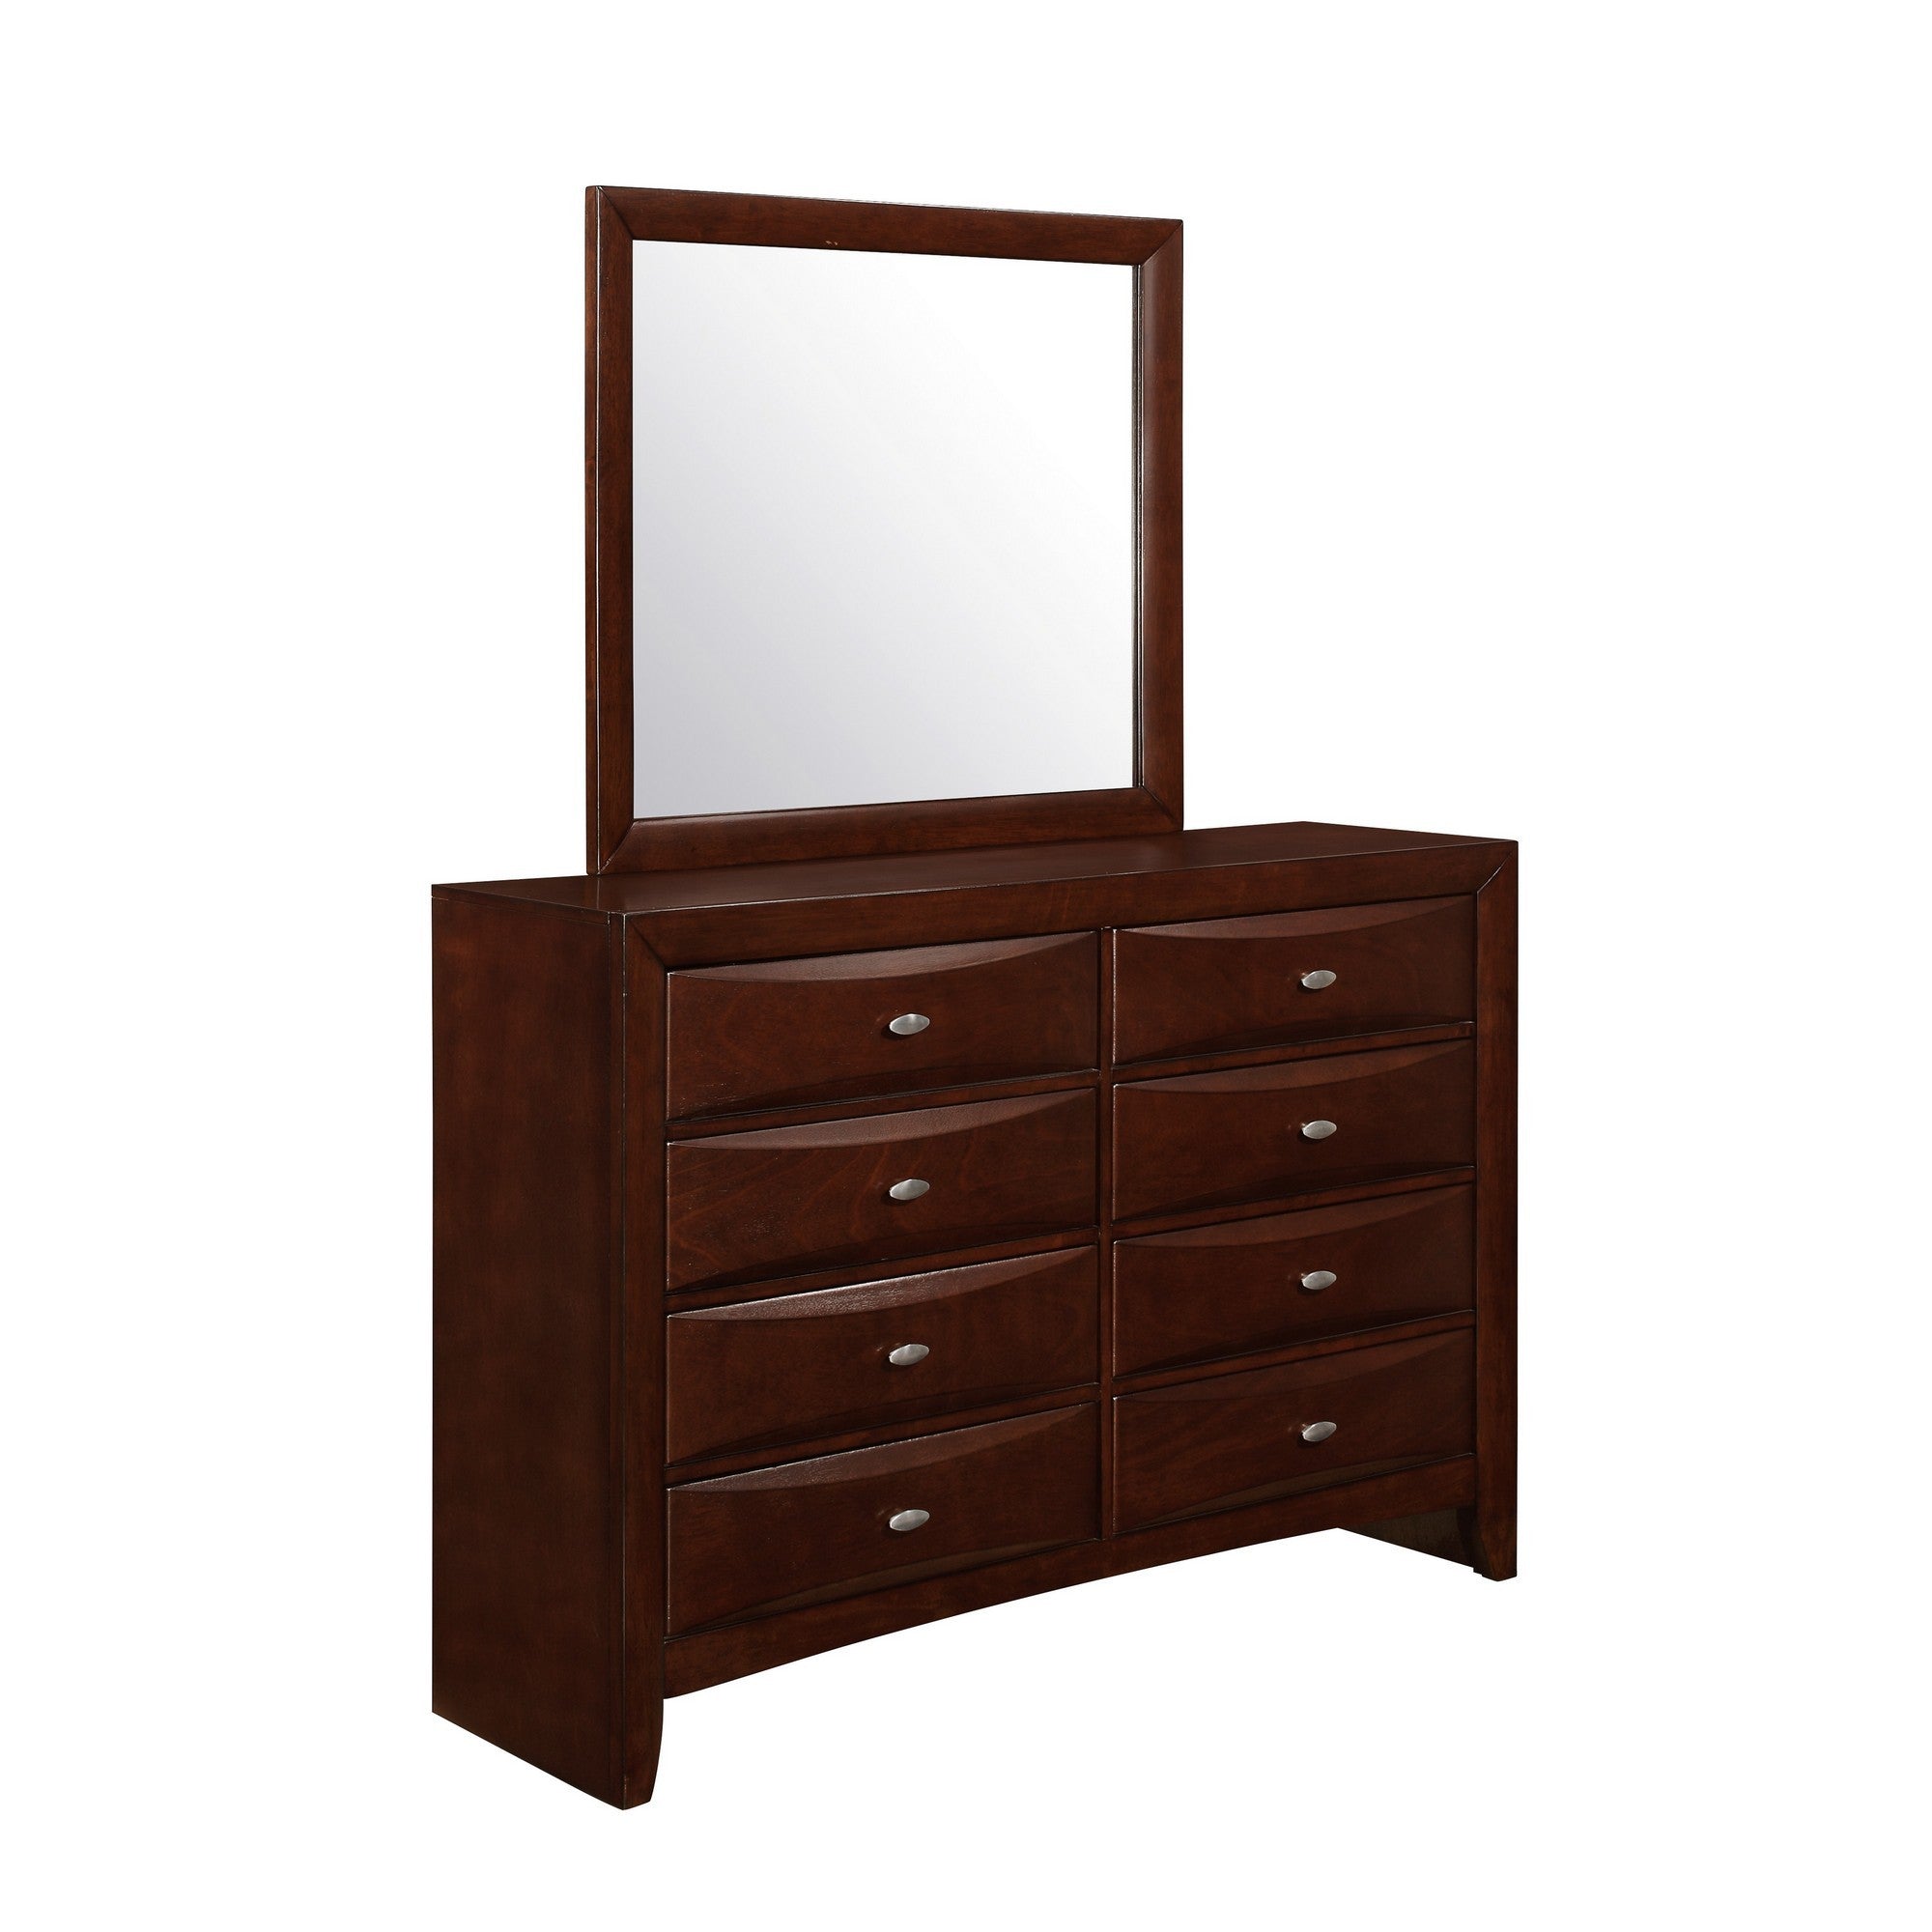 New Merlot Dresser with 5 Chambared Drawer Default Title